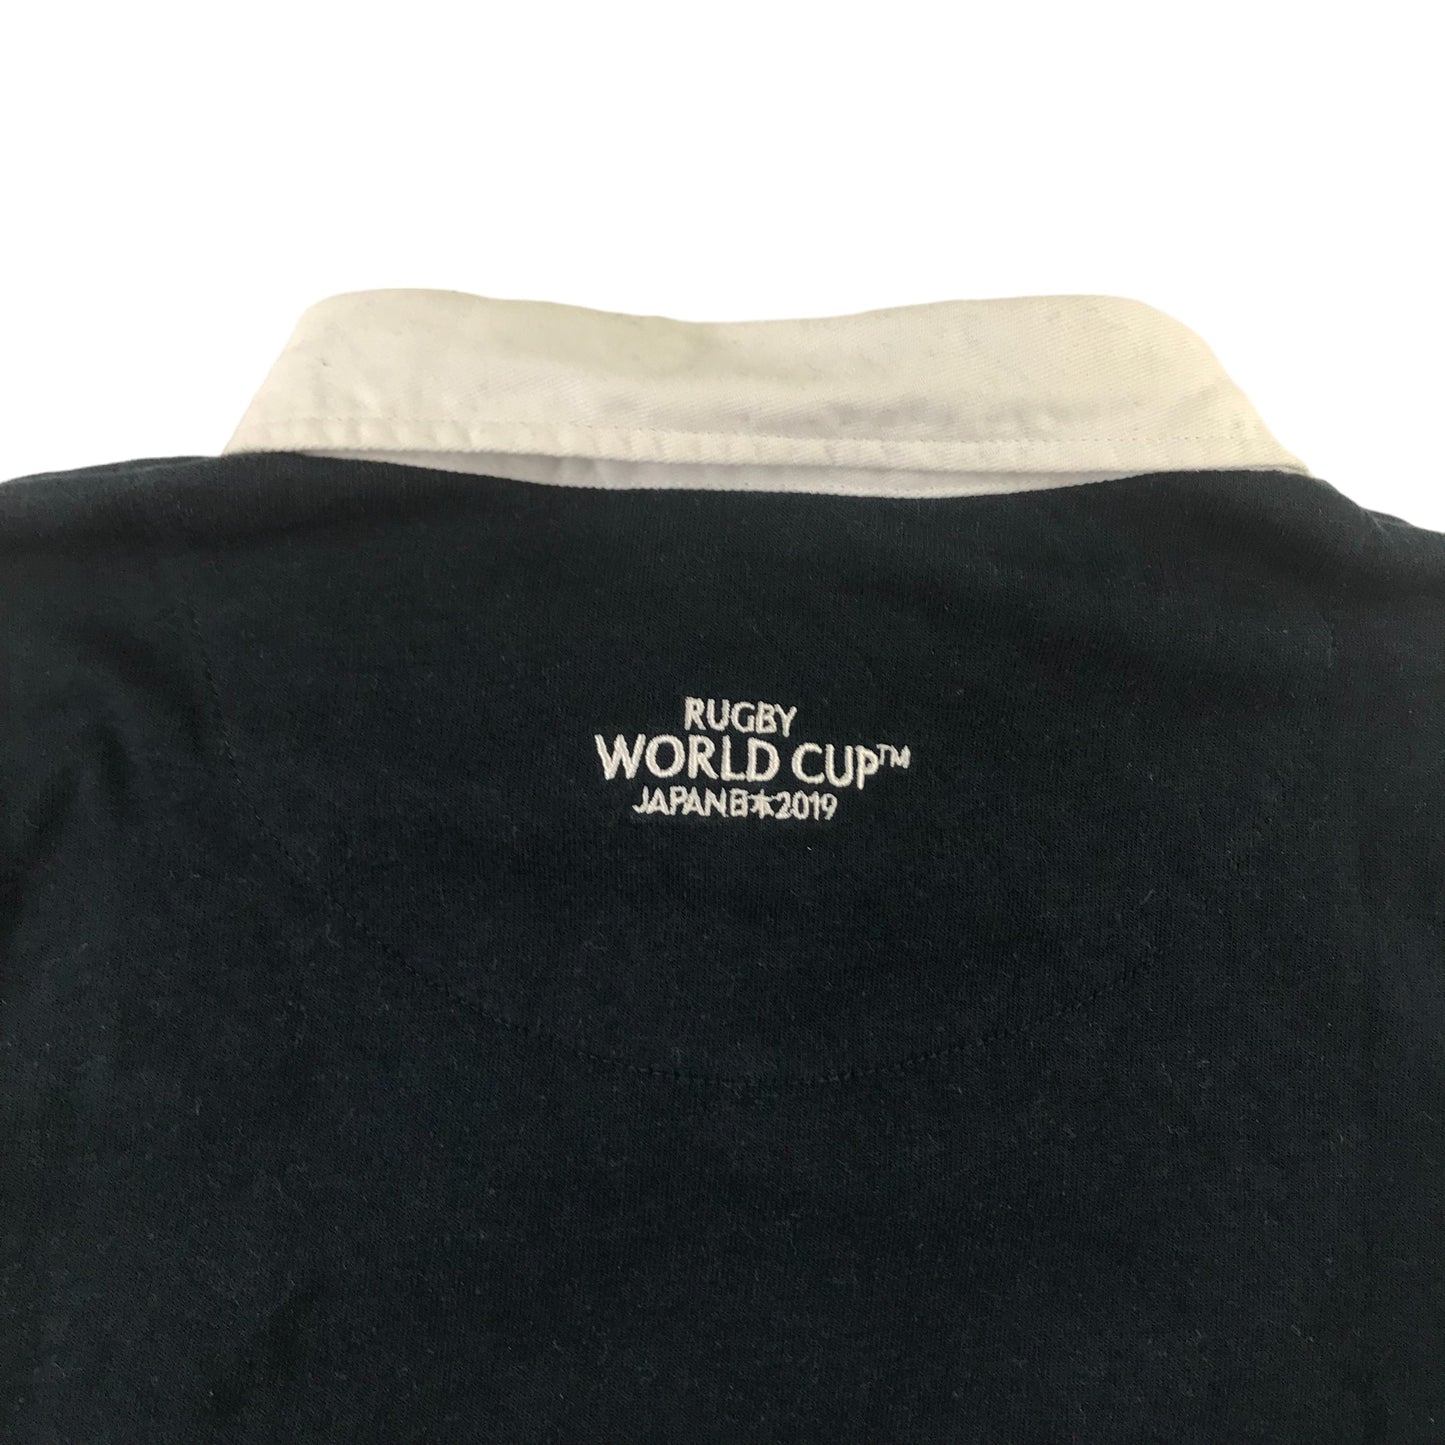 Rugby World Cup Japan 2019 Sports Top Age 11 Navy with White Collar and Blue Strip Across Chest Cotton